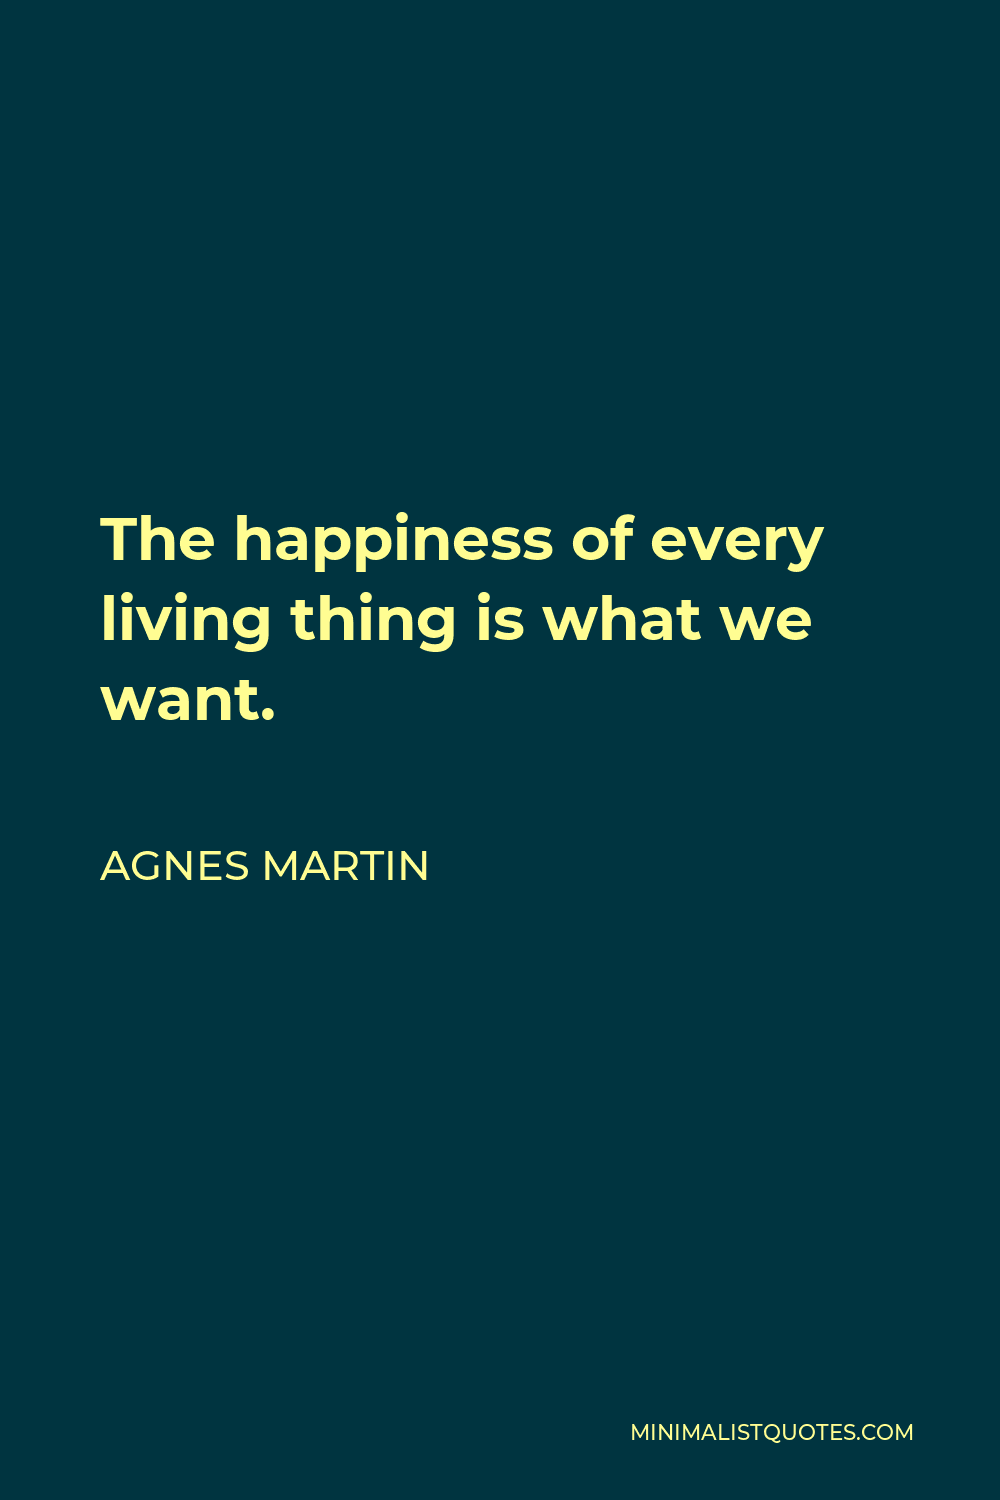 Agnes Martin Quote - The happiness of every living thing is what we want.